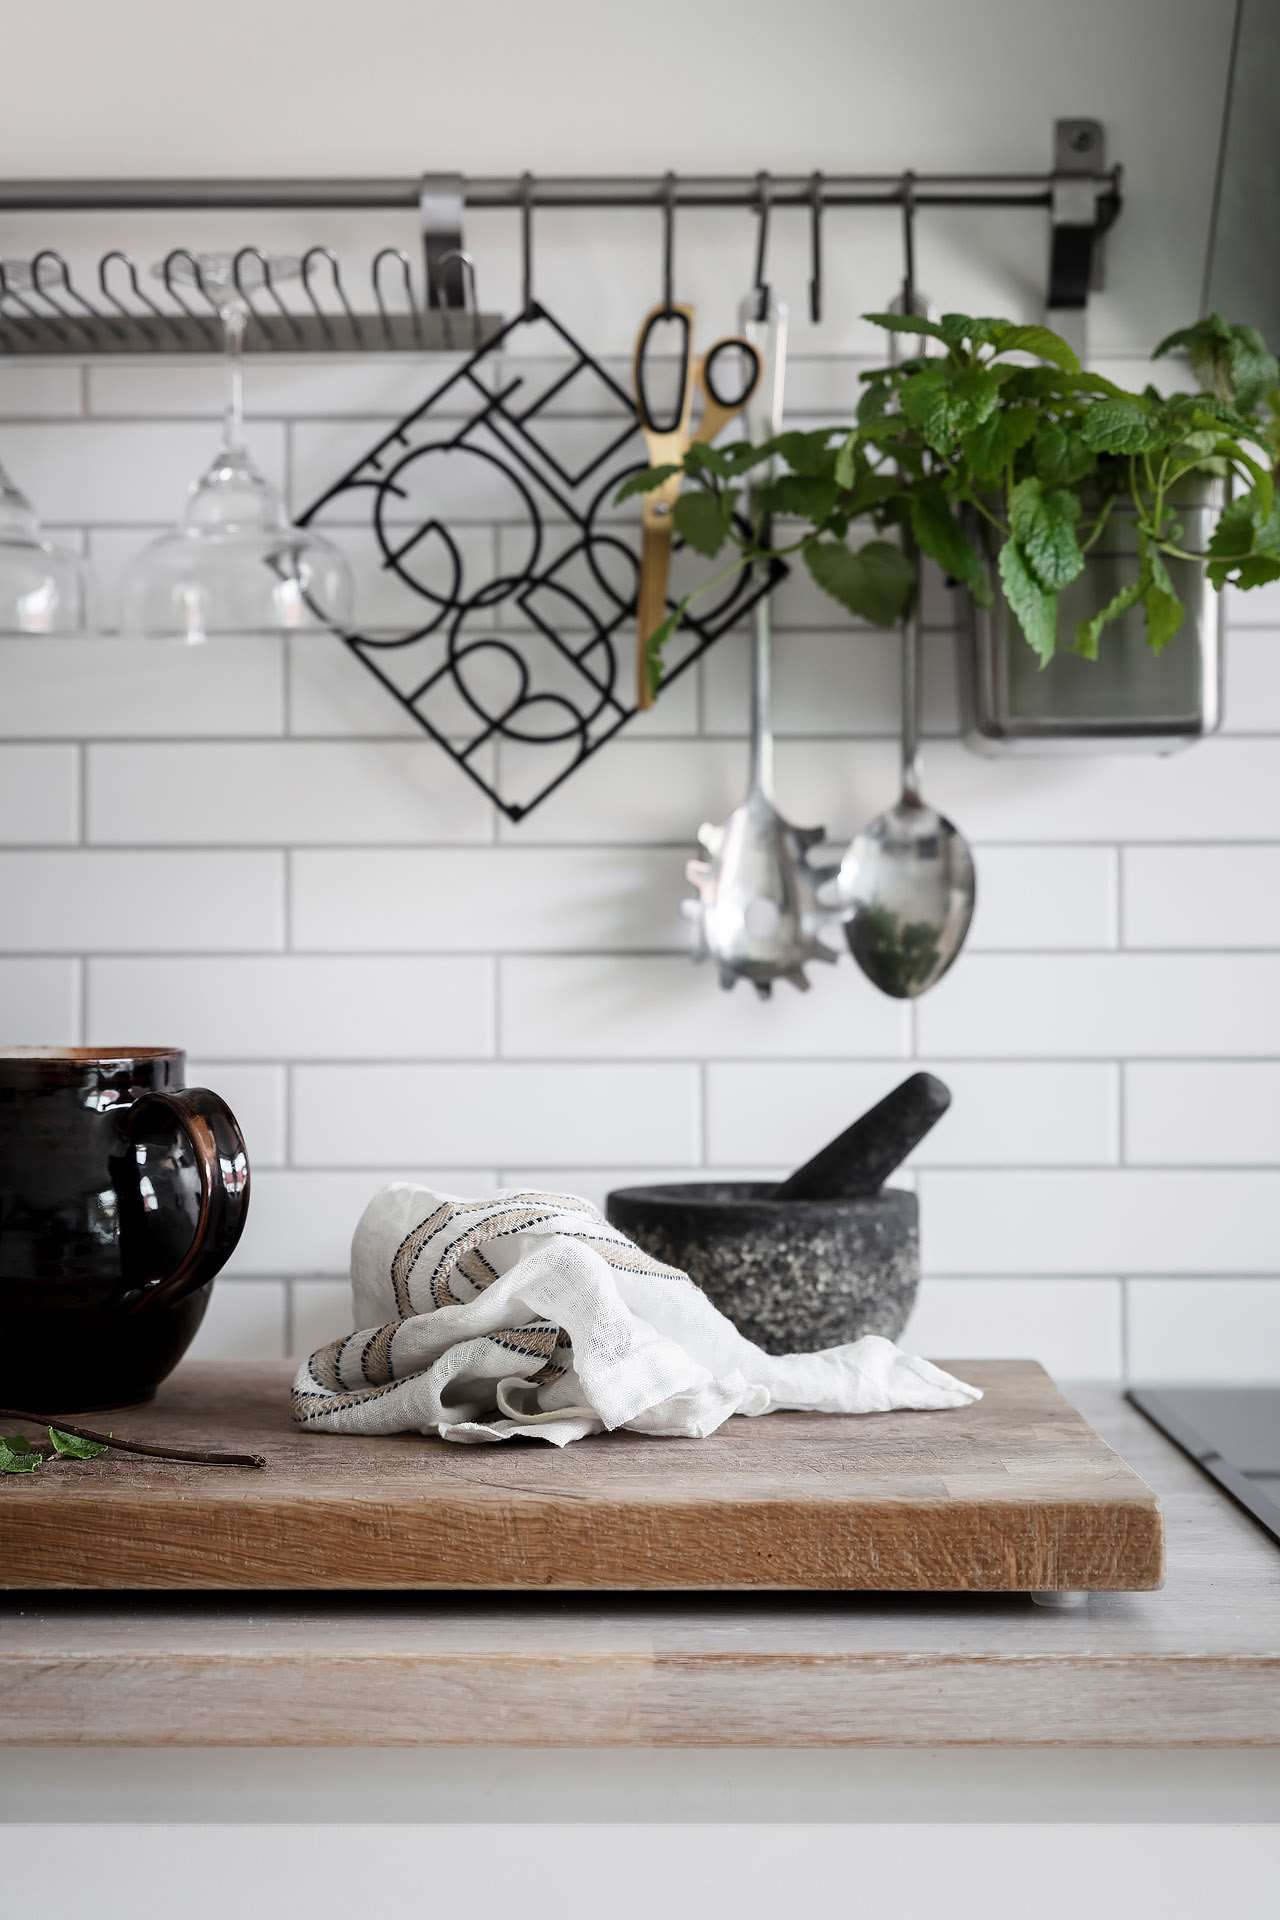 Blend Linen and stone against clean white subway tile 